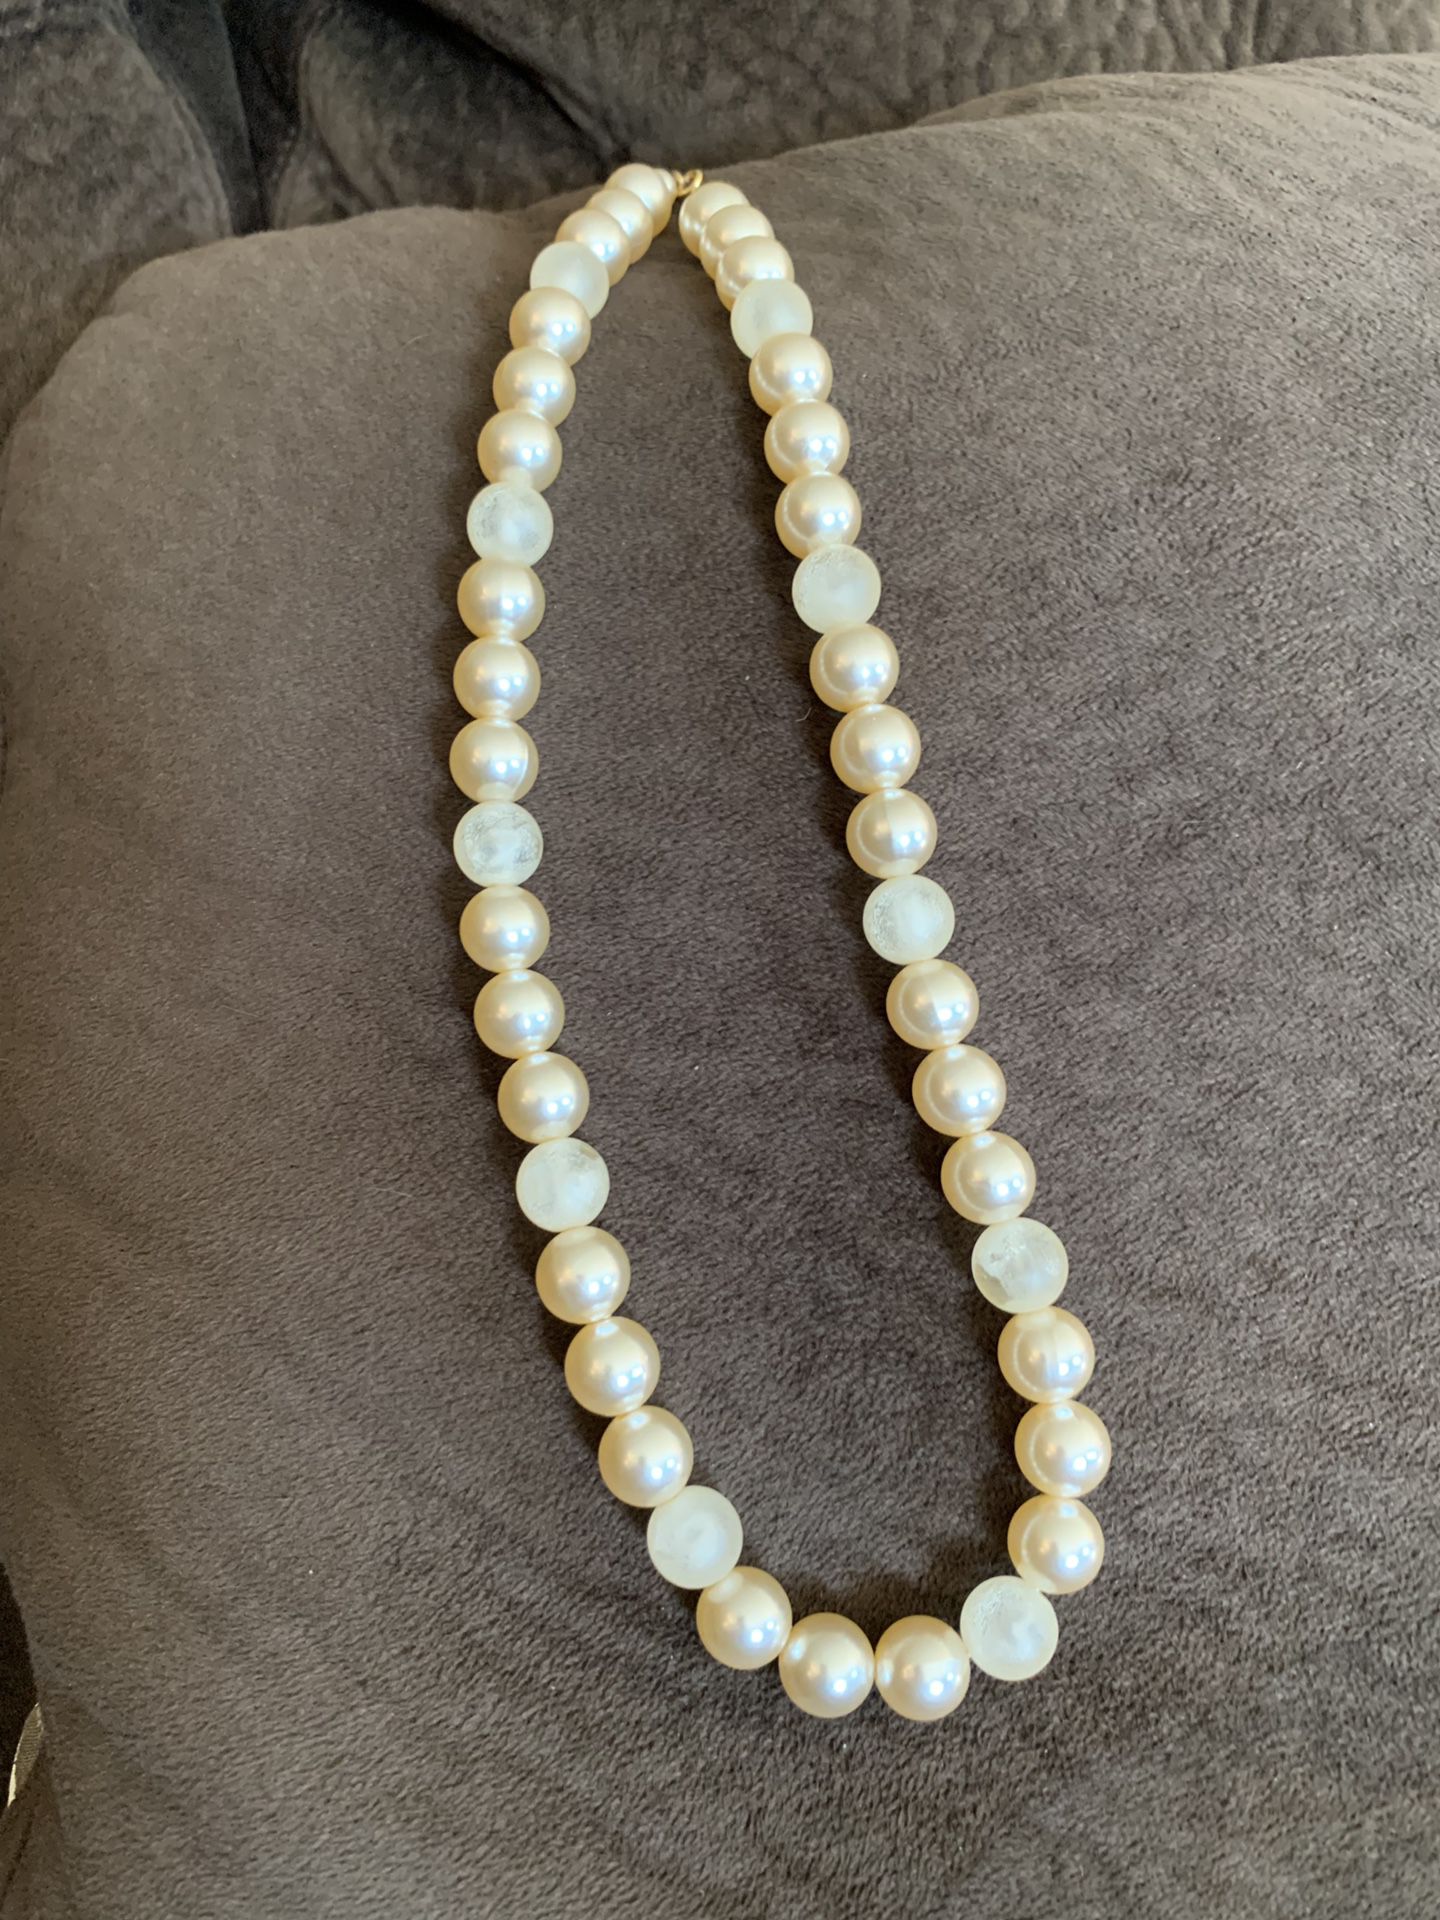 Pearl type necklace